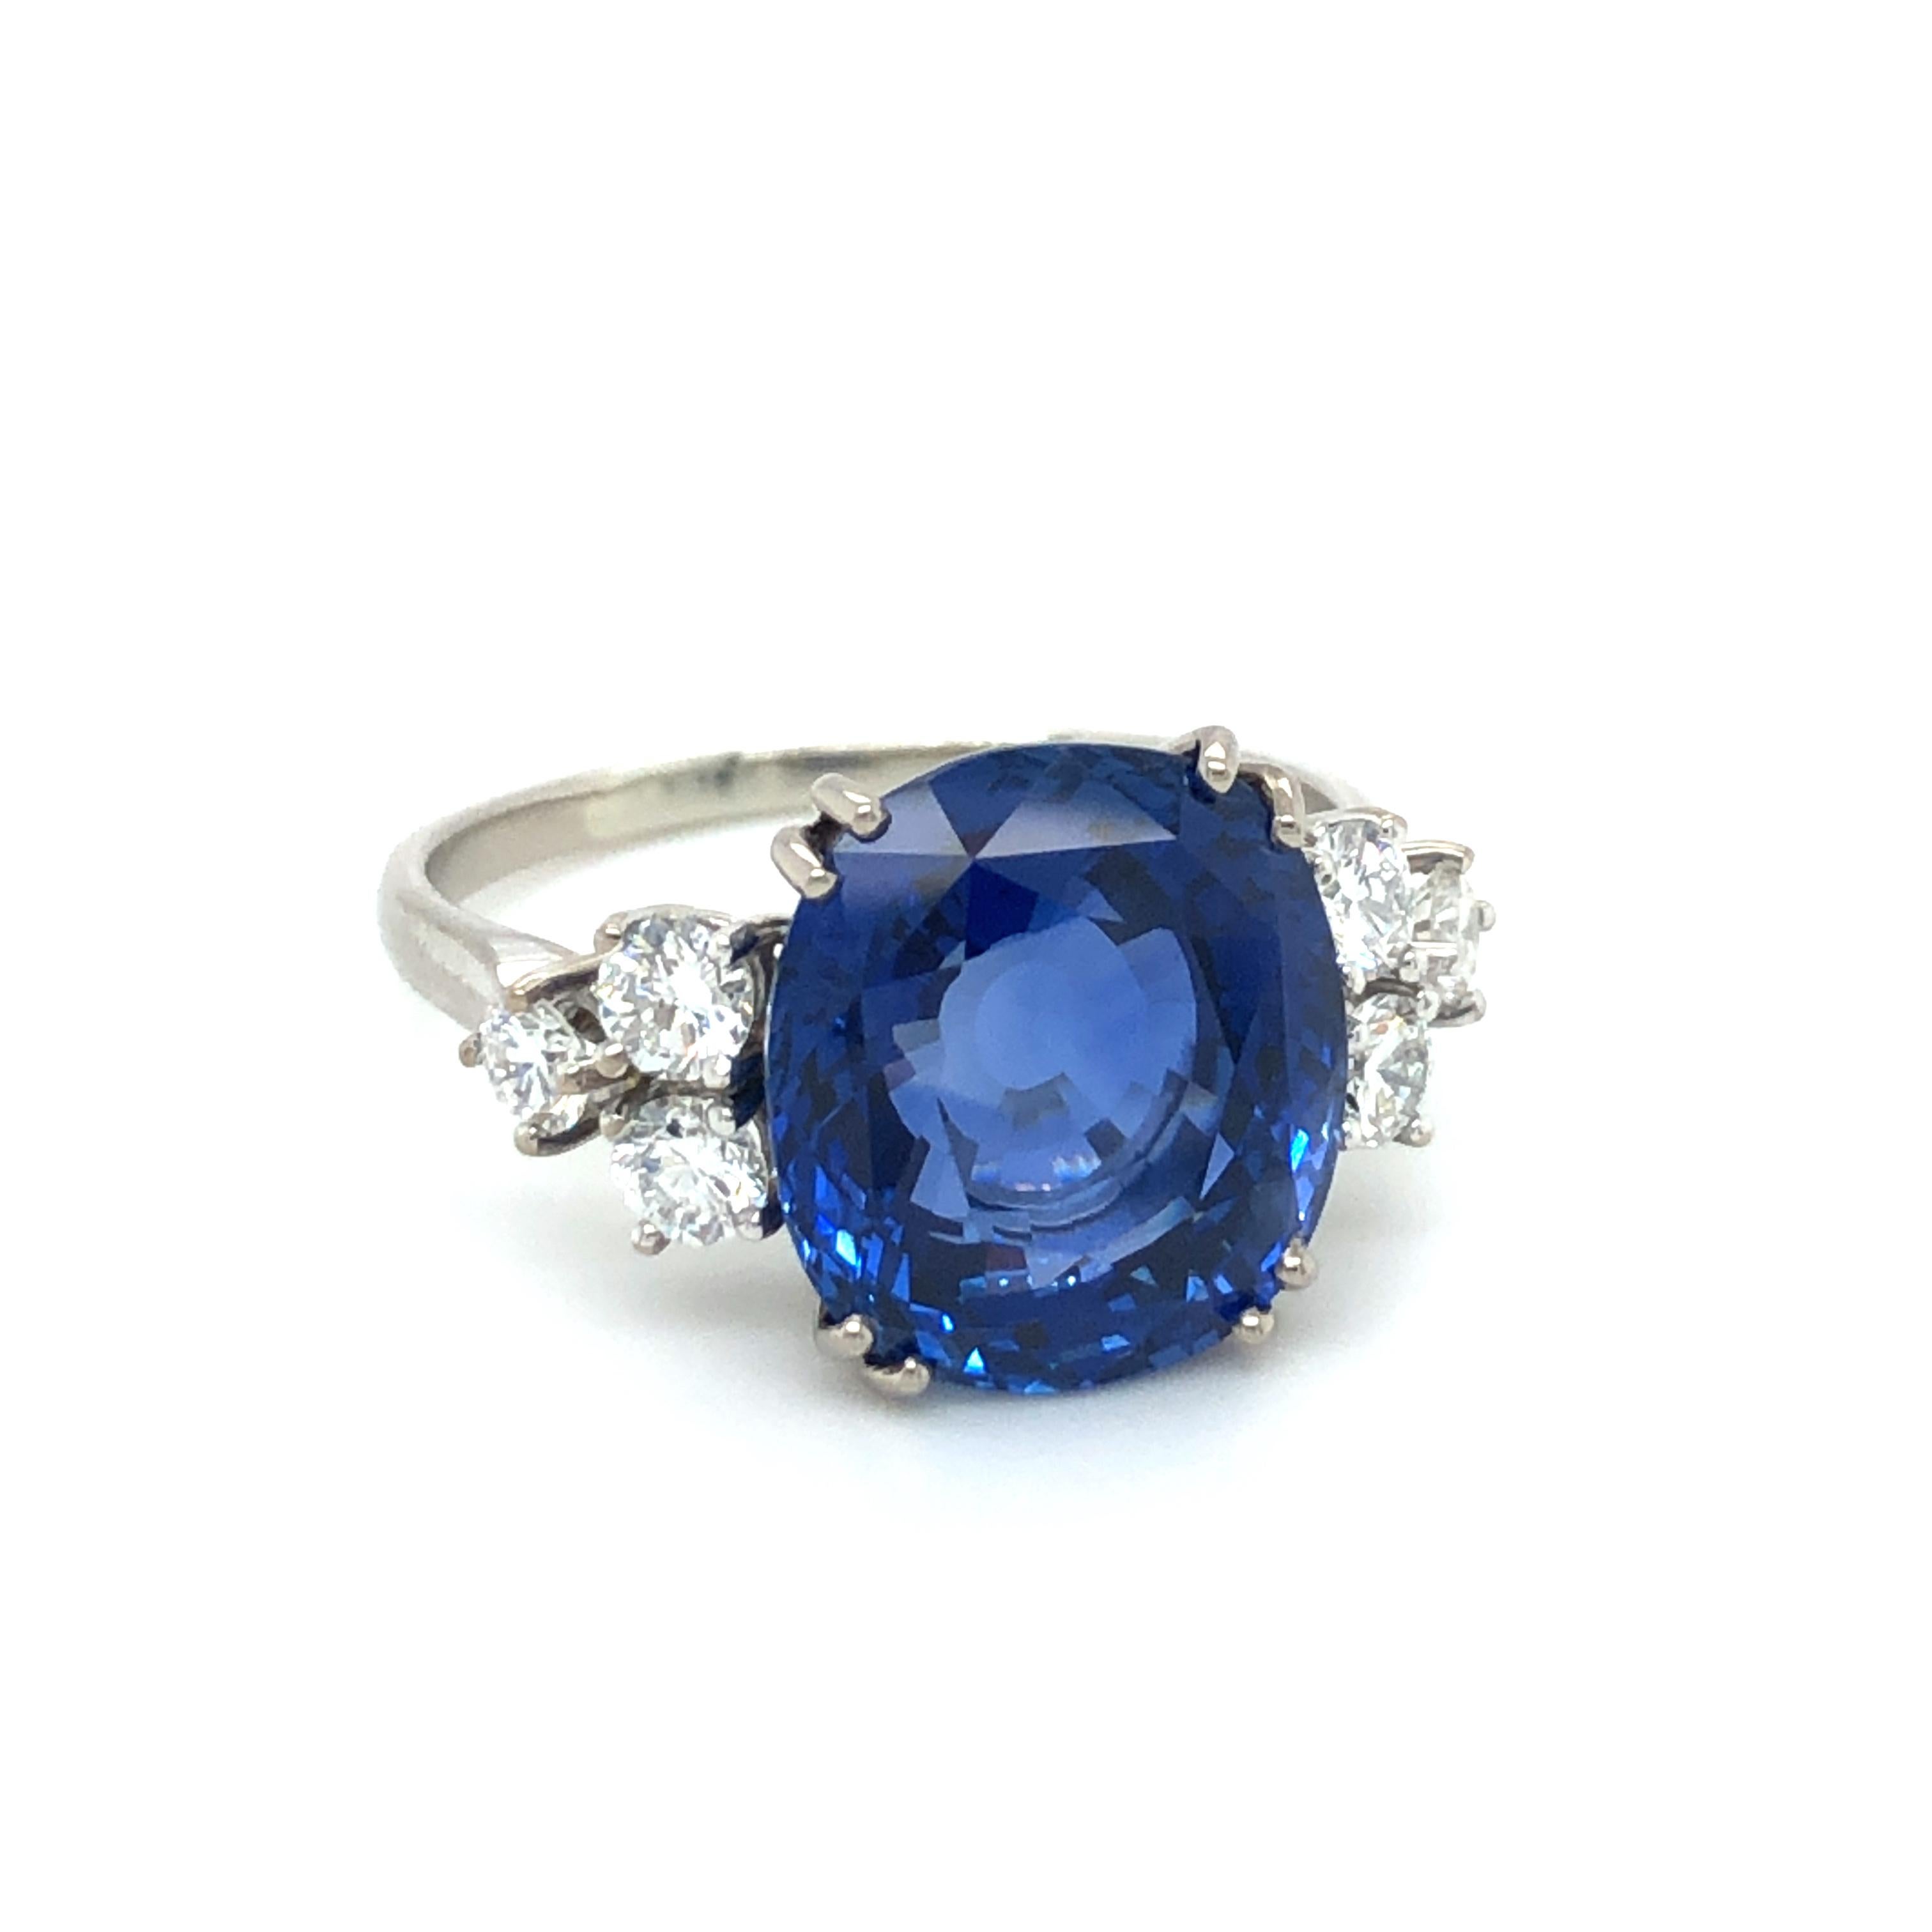 This timeless and elegant ring by Swiss jewller Gübelin features a beautifully coloured, untreated Burmese sapphire of 9.32 carats. Accented by six brilliant-cut diamonds of G/H colour and vs clarity.
The mounting is carefully handcrafted in 18